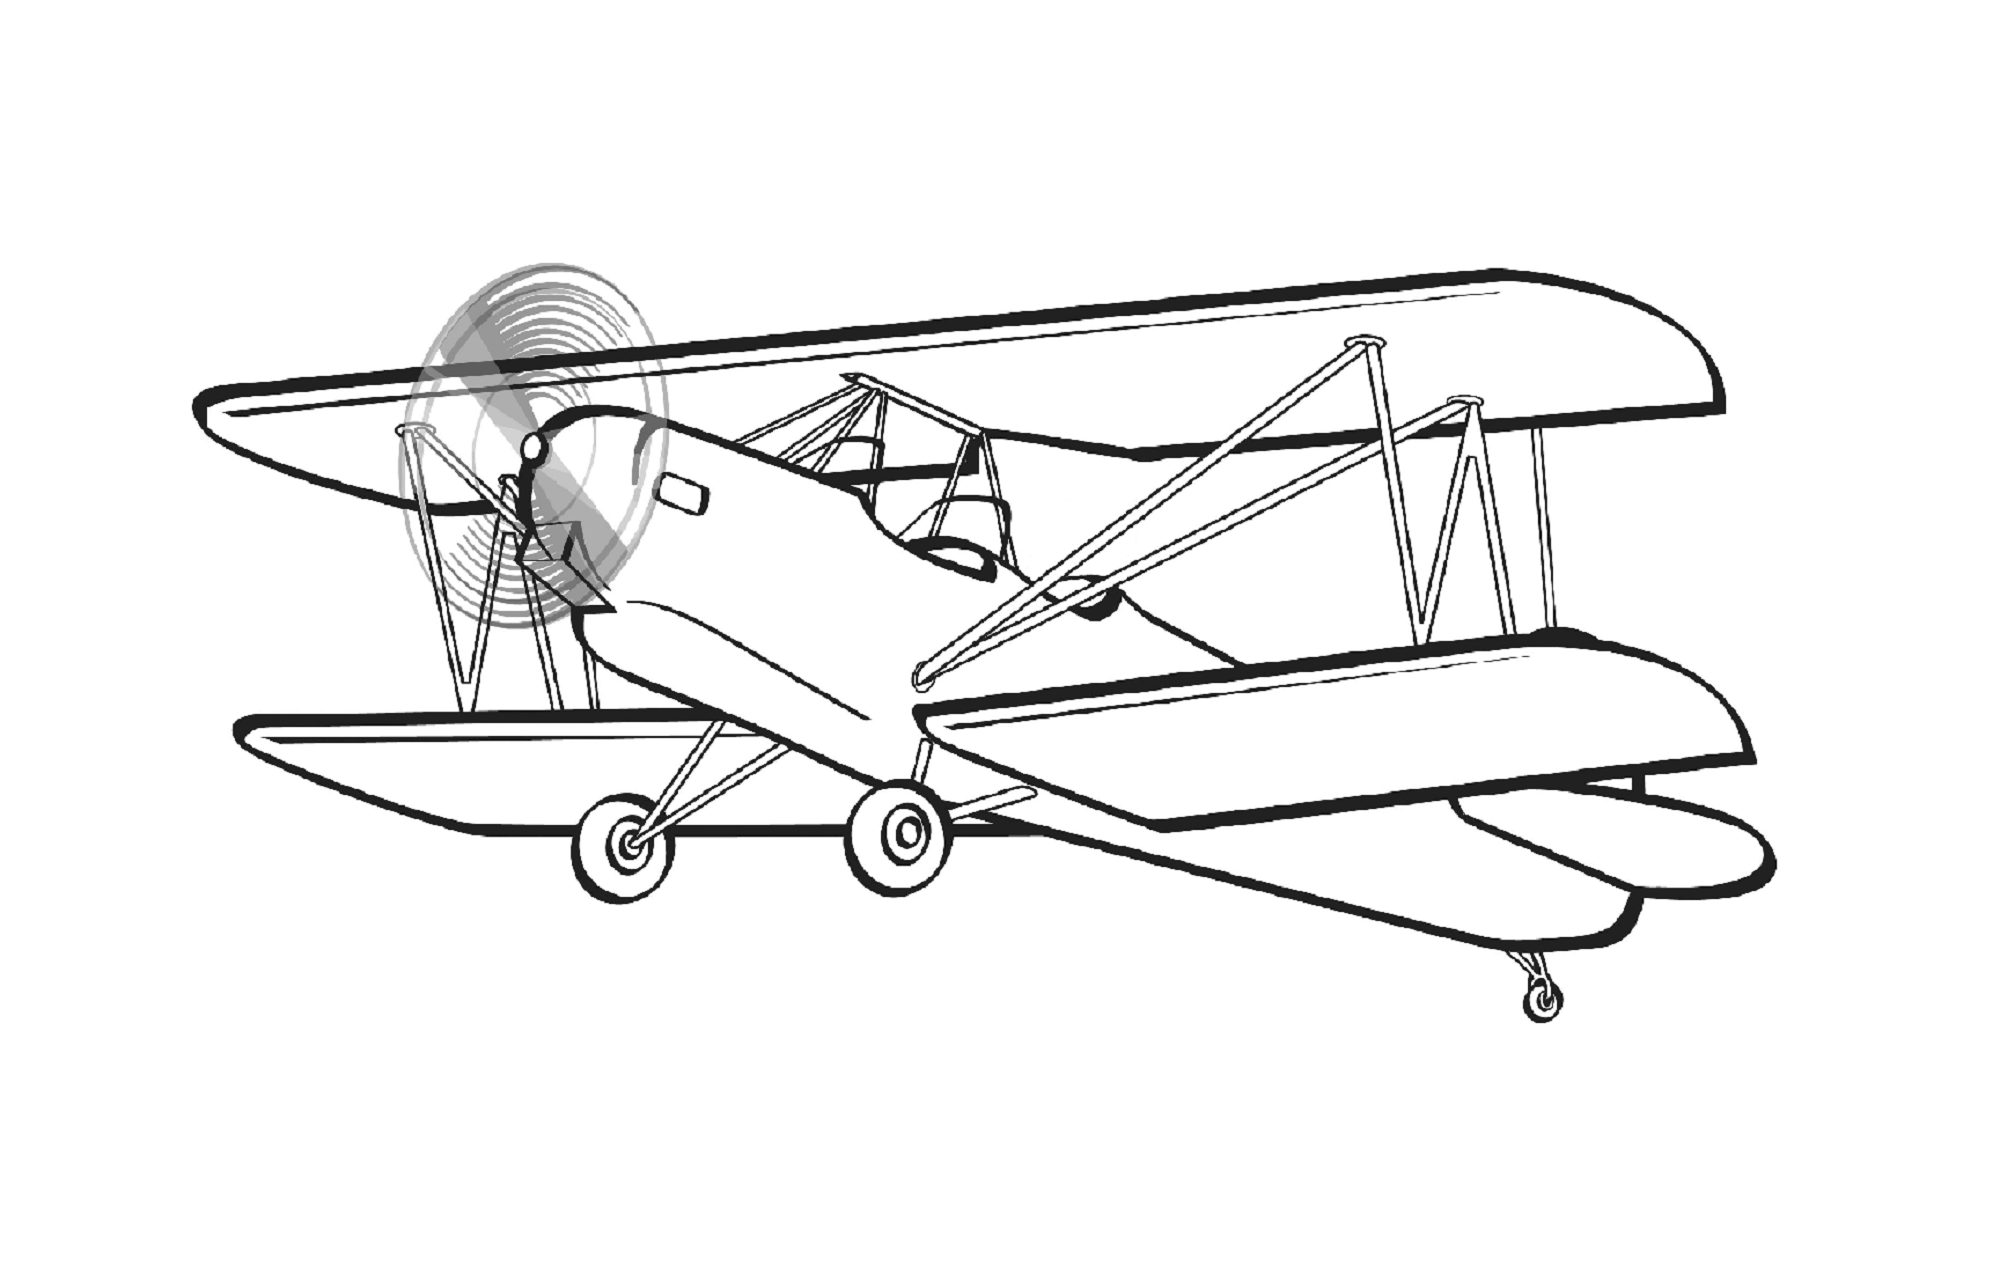 The best free Biplane drawing images. Download from 62 free drawings of